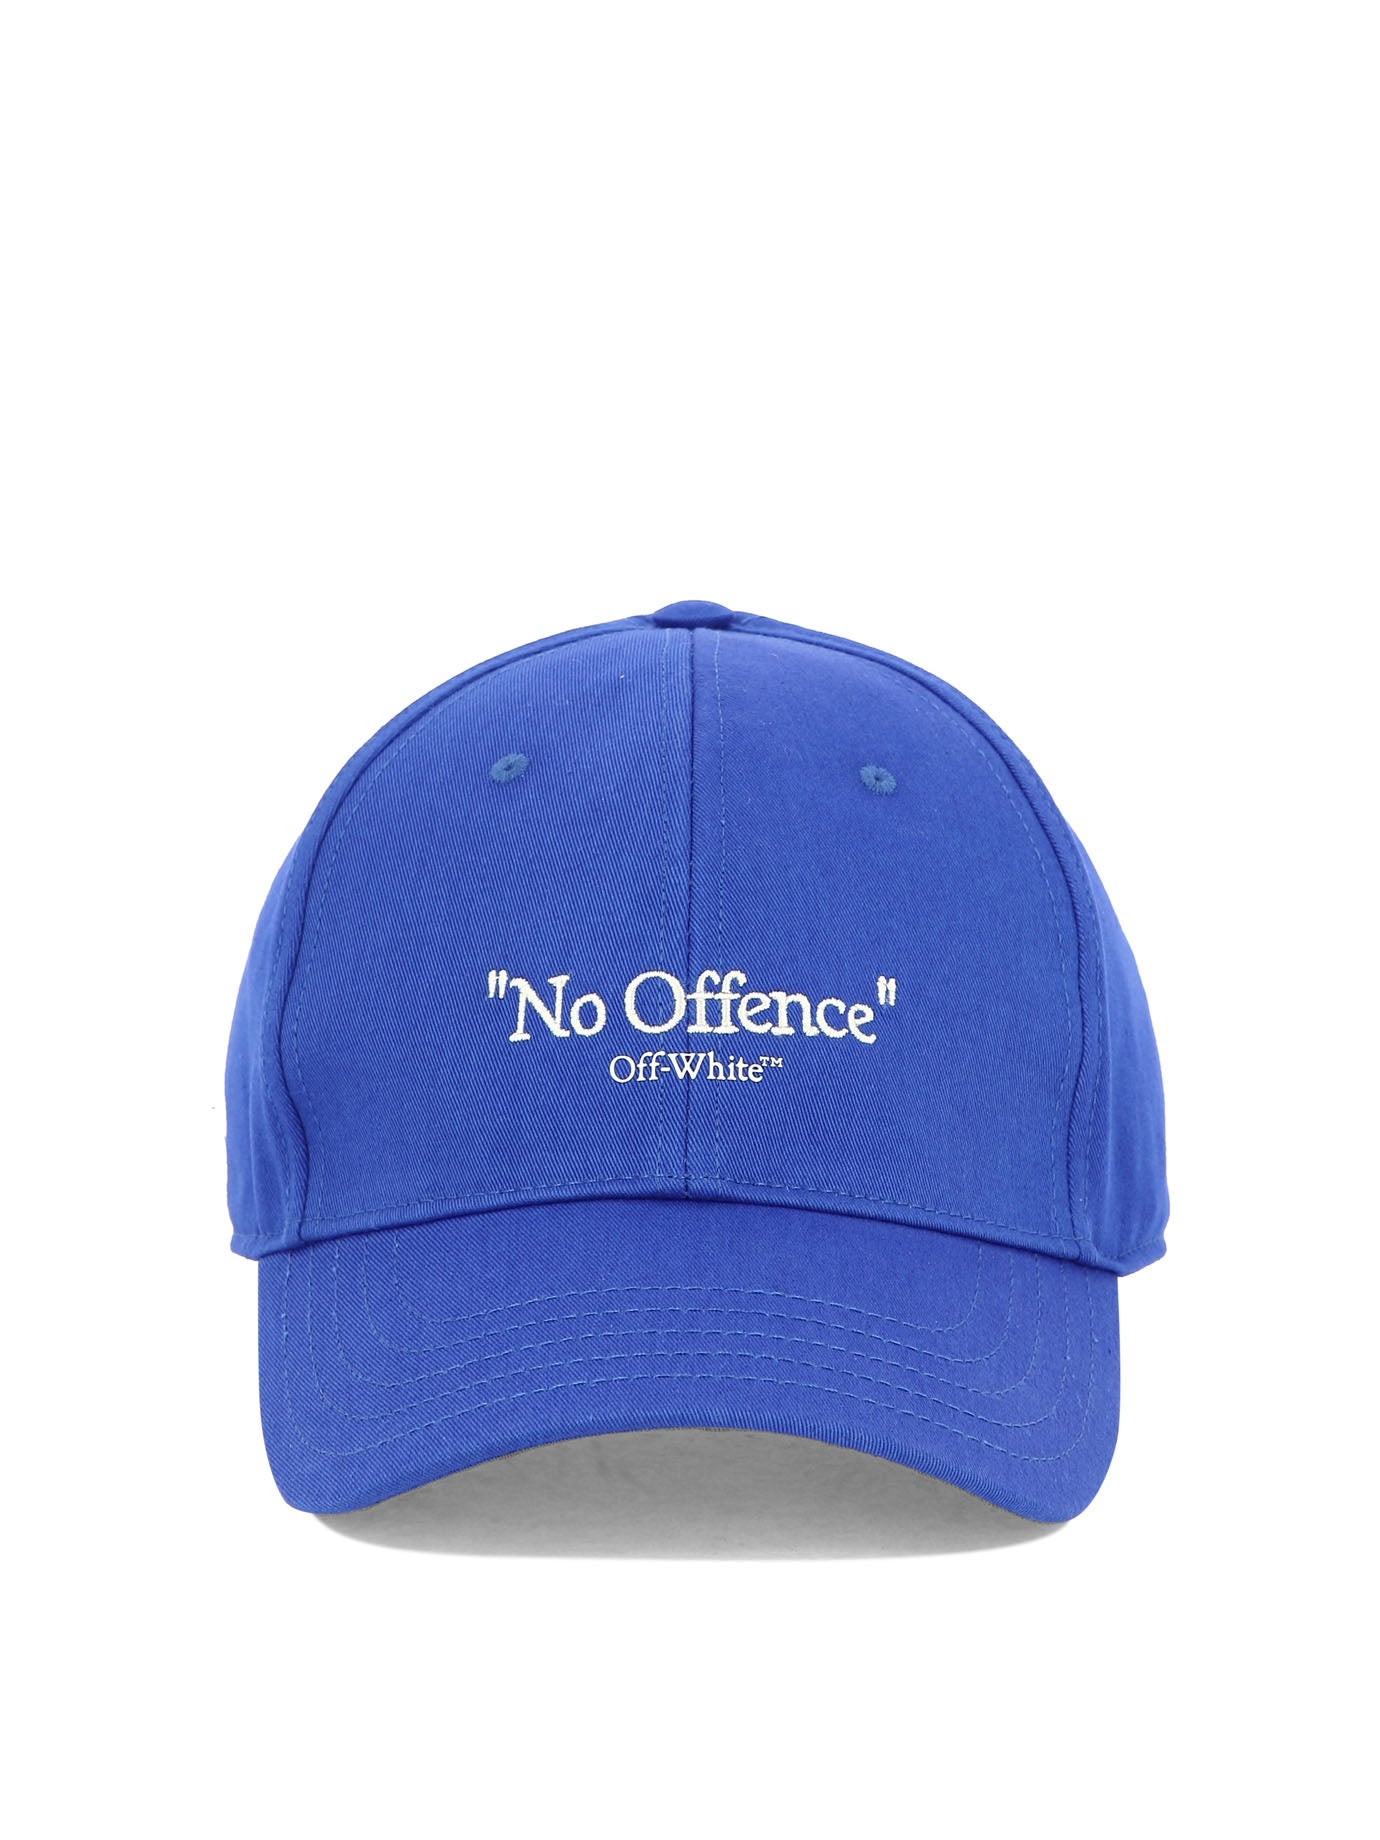 OFF-WHITE OFF WHITE NO OFFENCE BASEBALL CAP